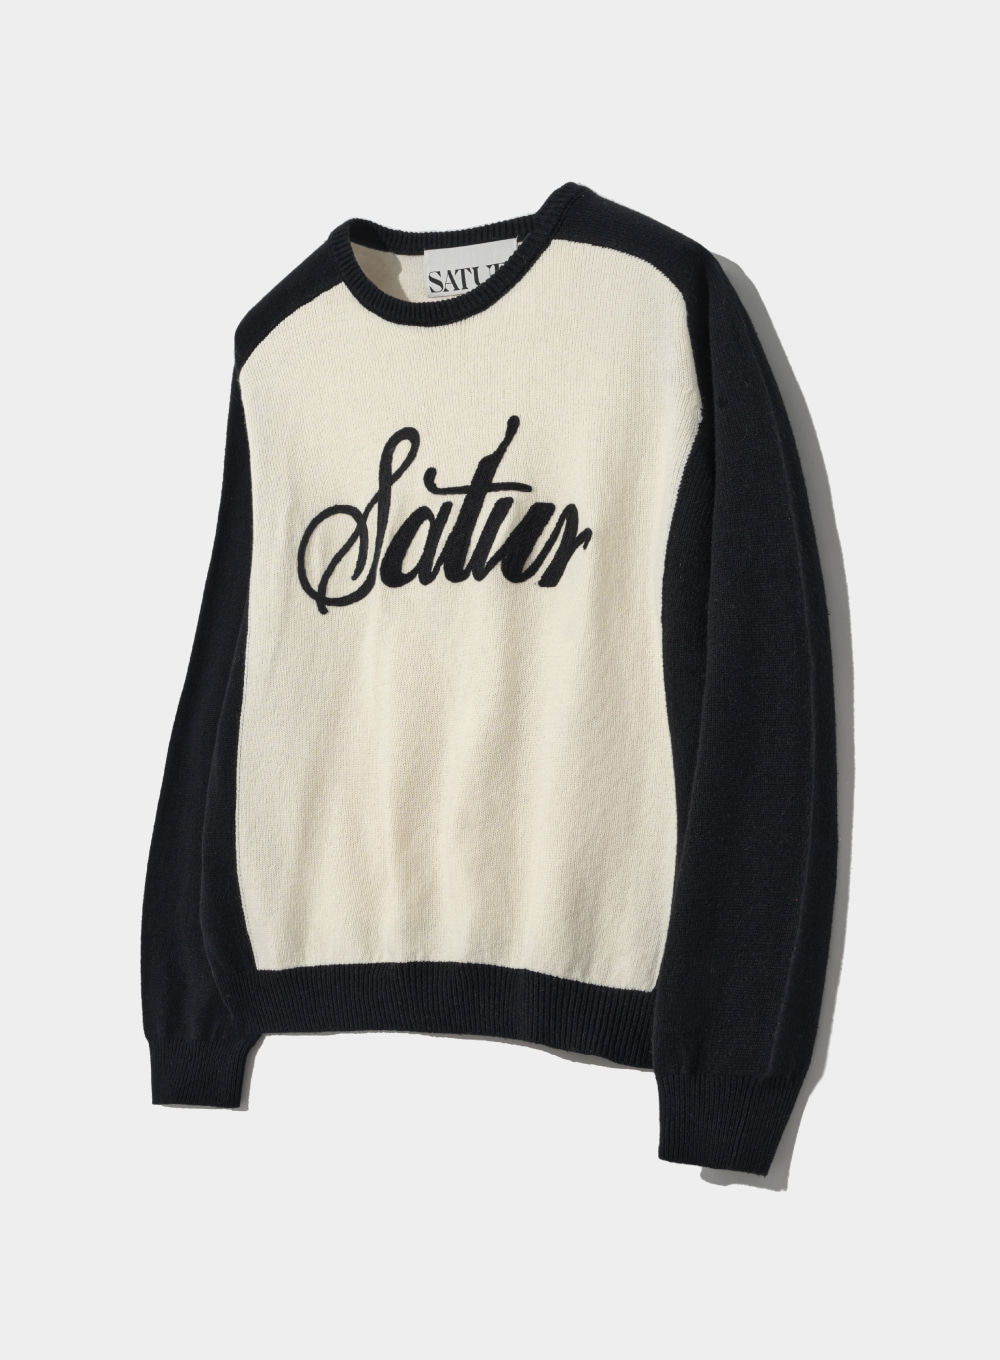 Retro Chain Embroidery Soft Knit - Ivory Black